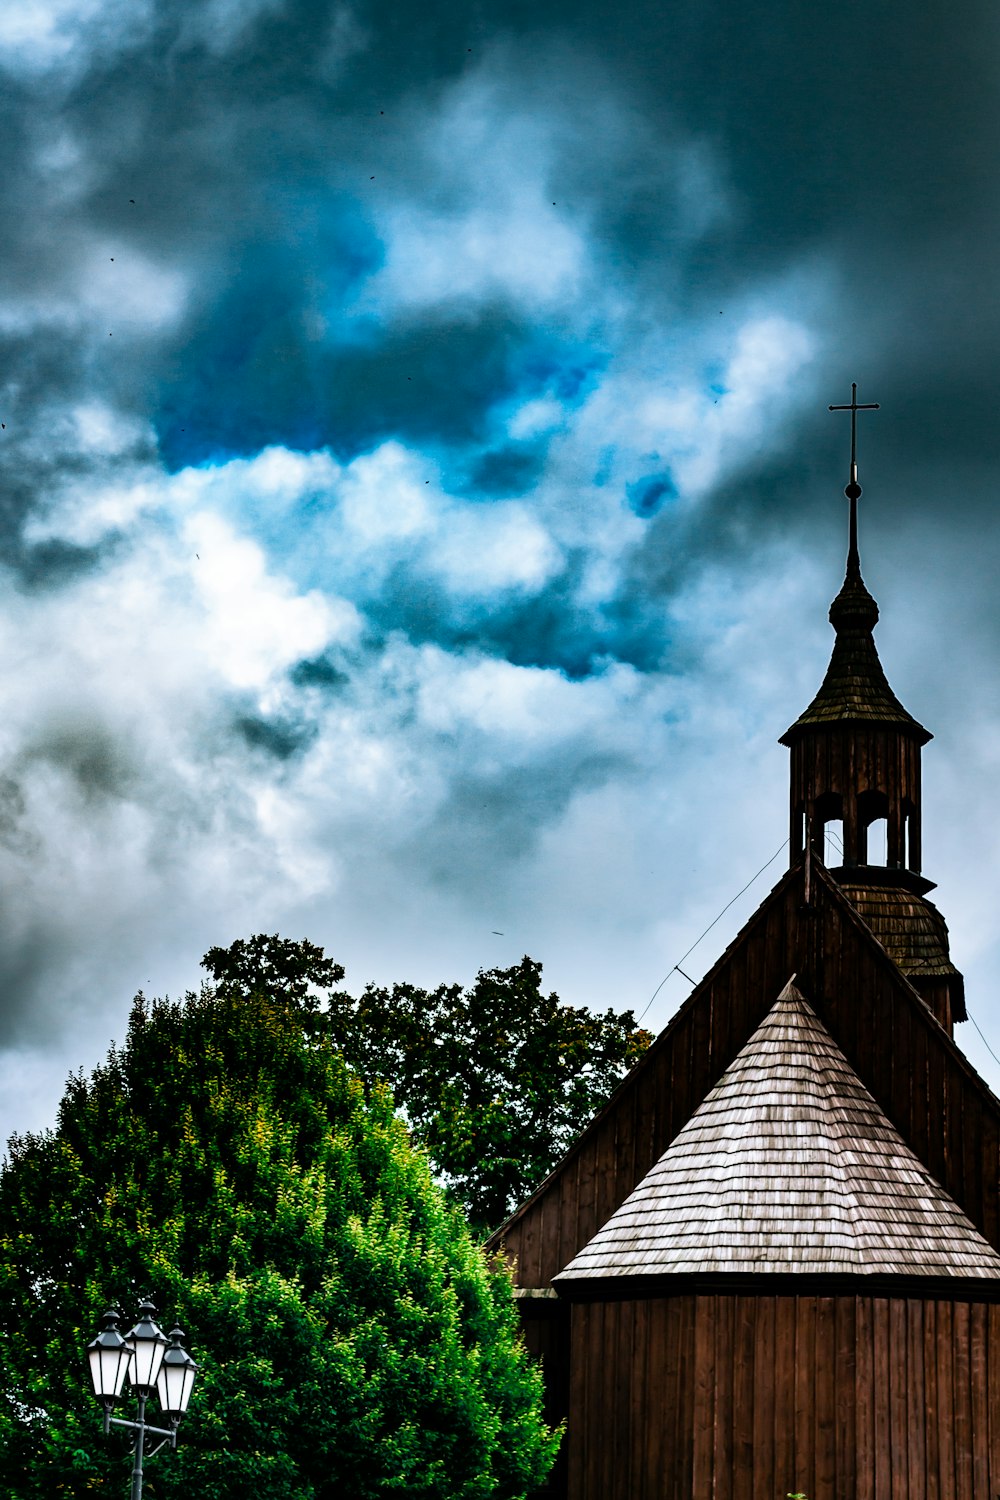 a wooden building with a steeple under a cloudy sky